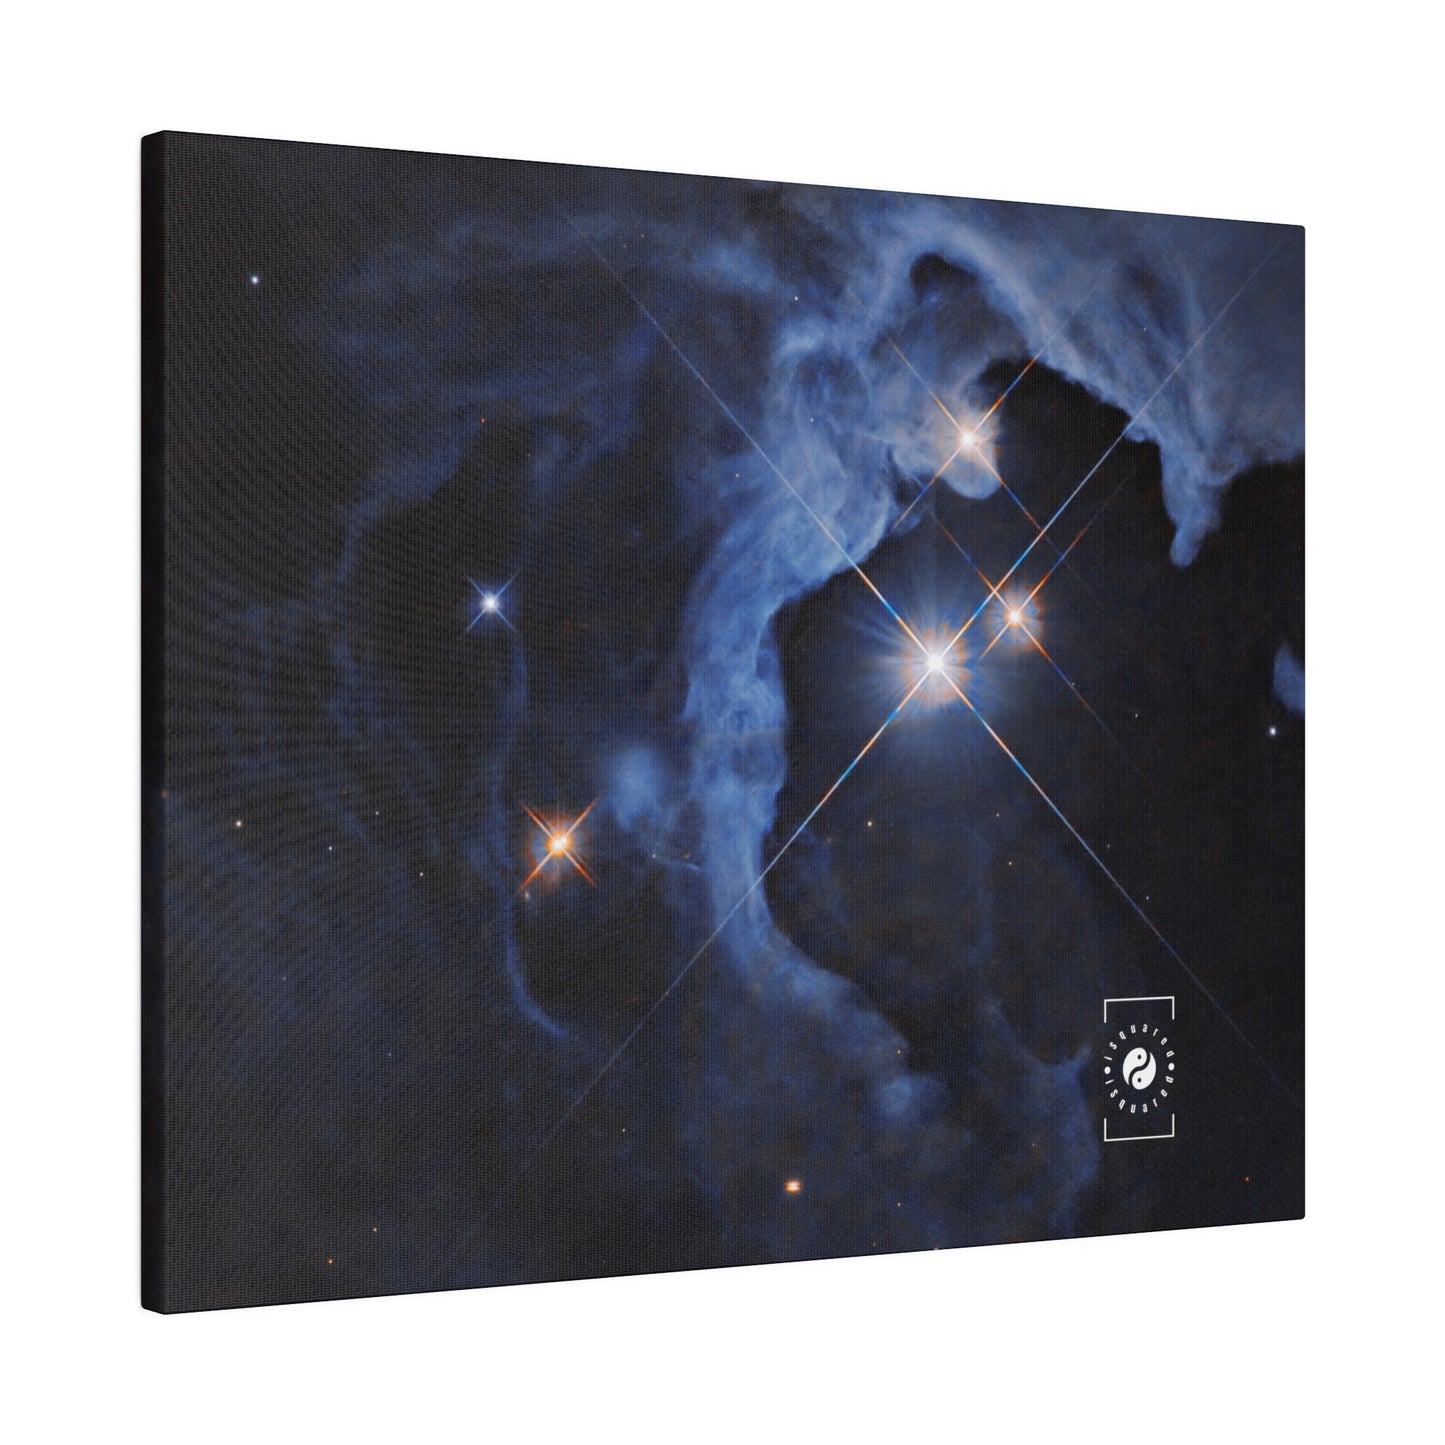 HP Tau, HP Tau G2, and G3 3 star system captured by Hubble - Art Print Canvas